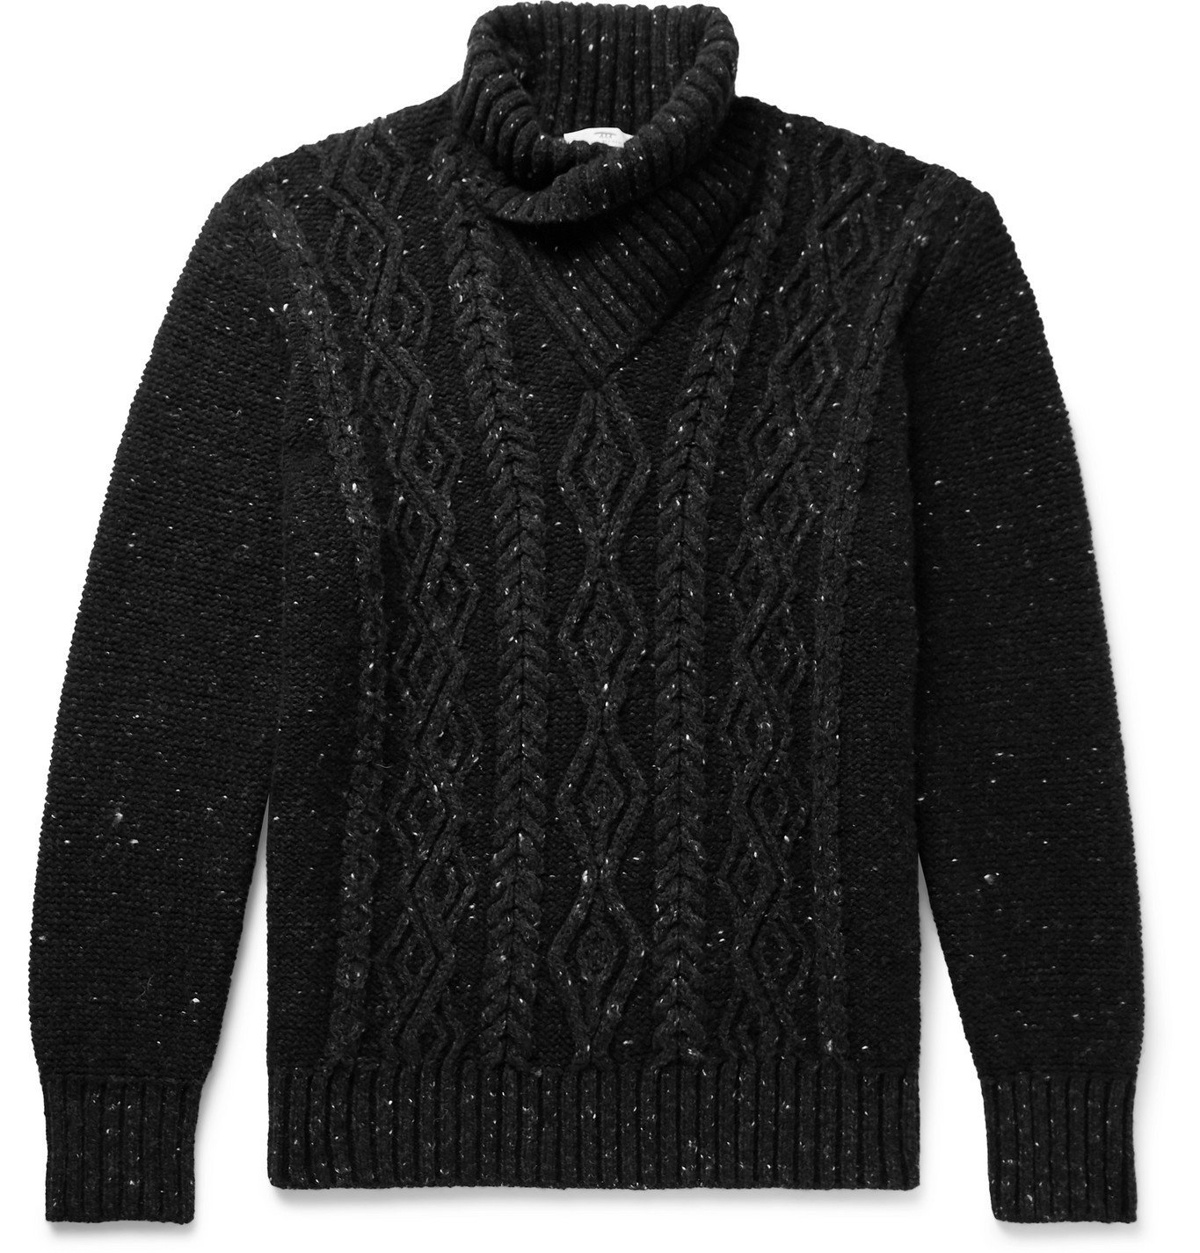 Inis Meáin - Shawl-Collar Cable-Knit Merino Wool and Cashmere-Blend ...